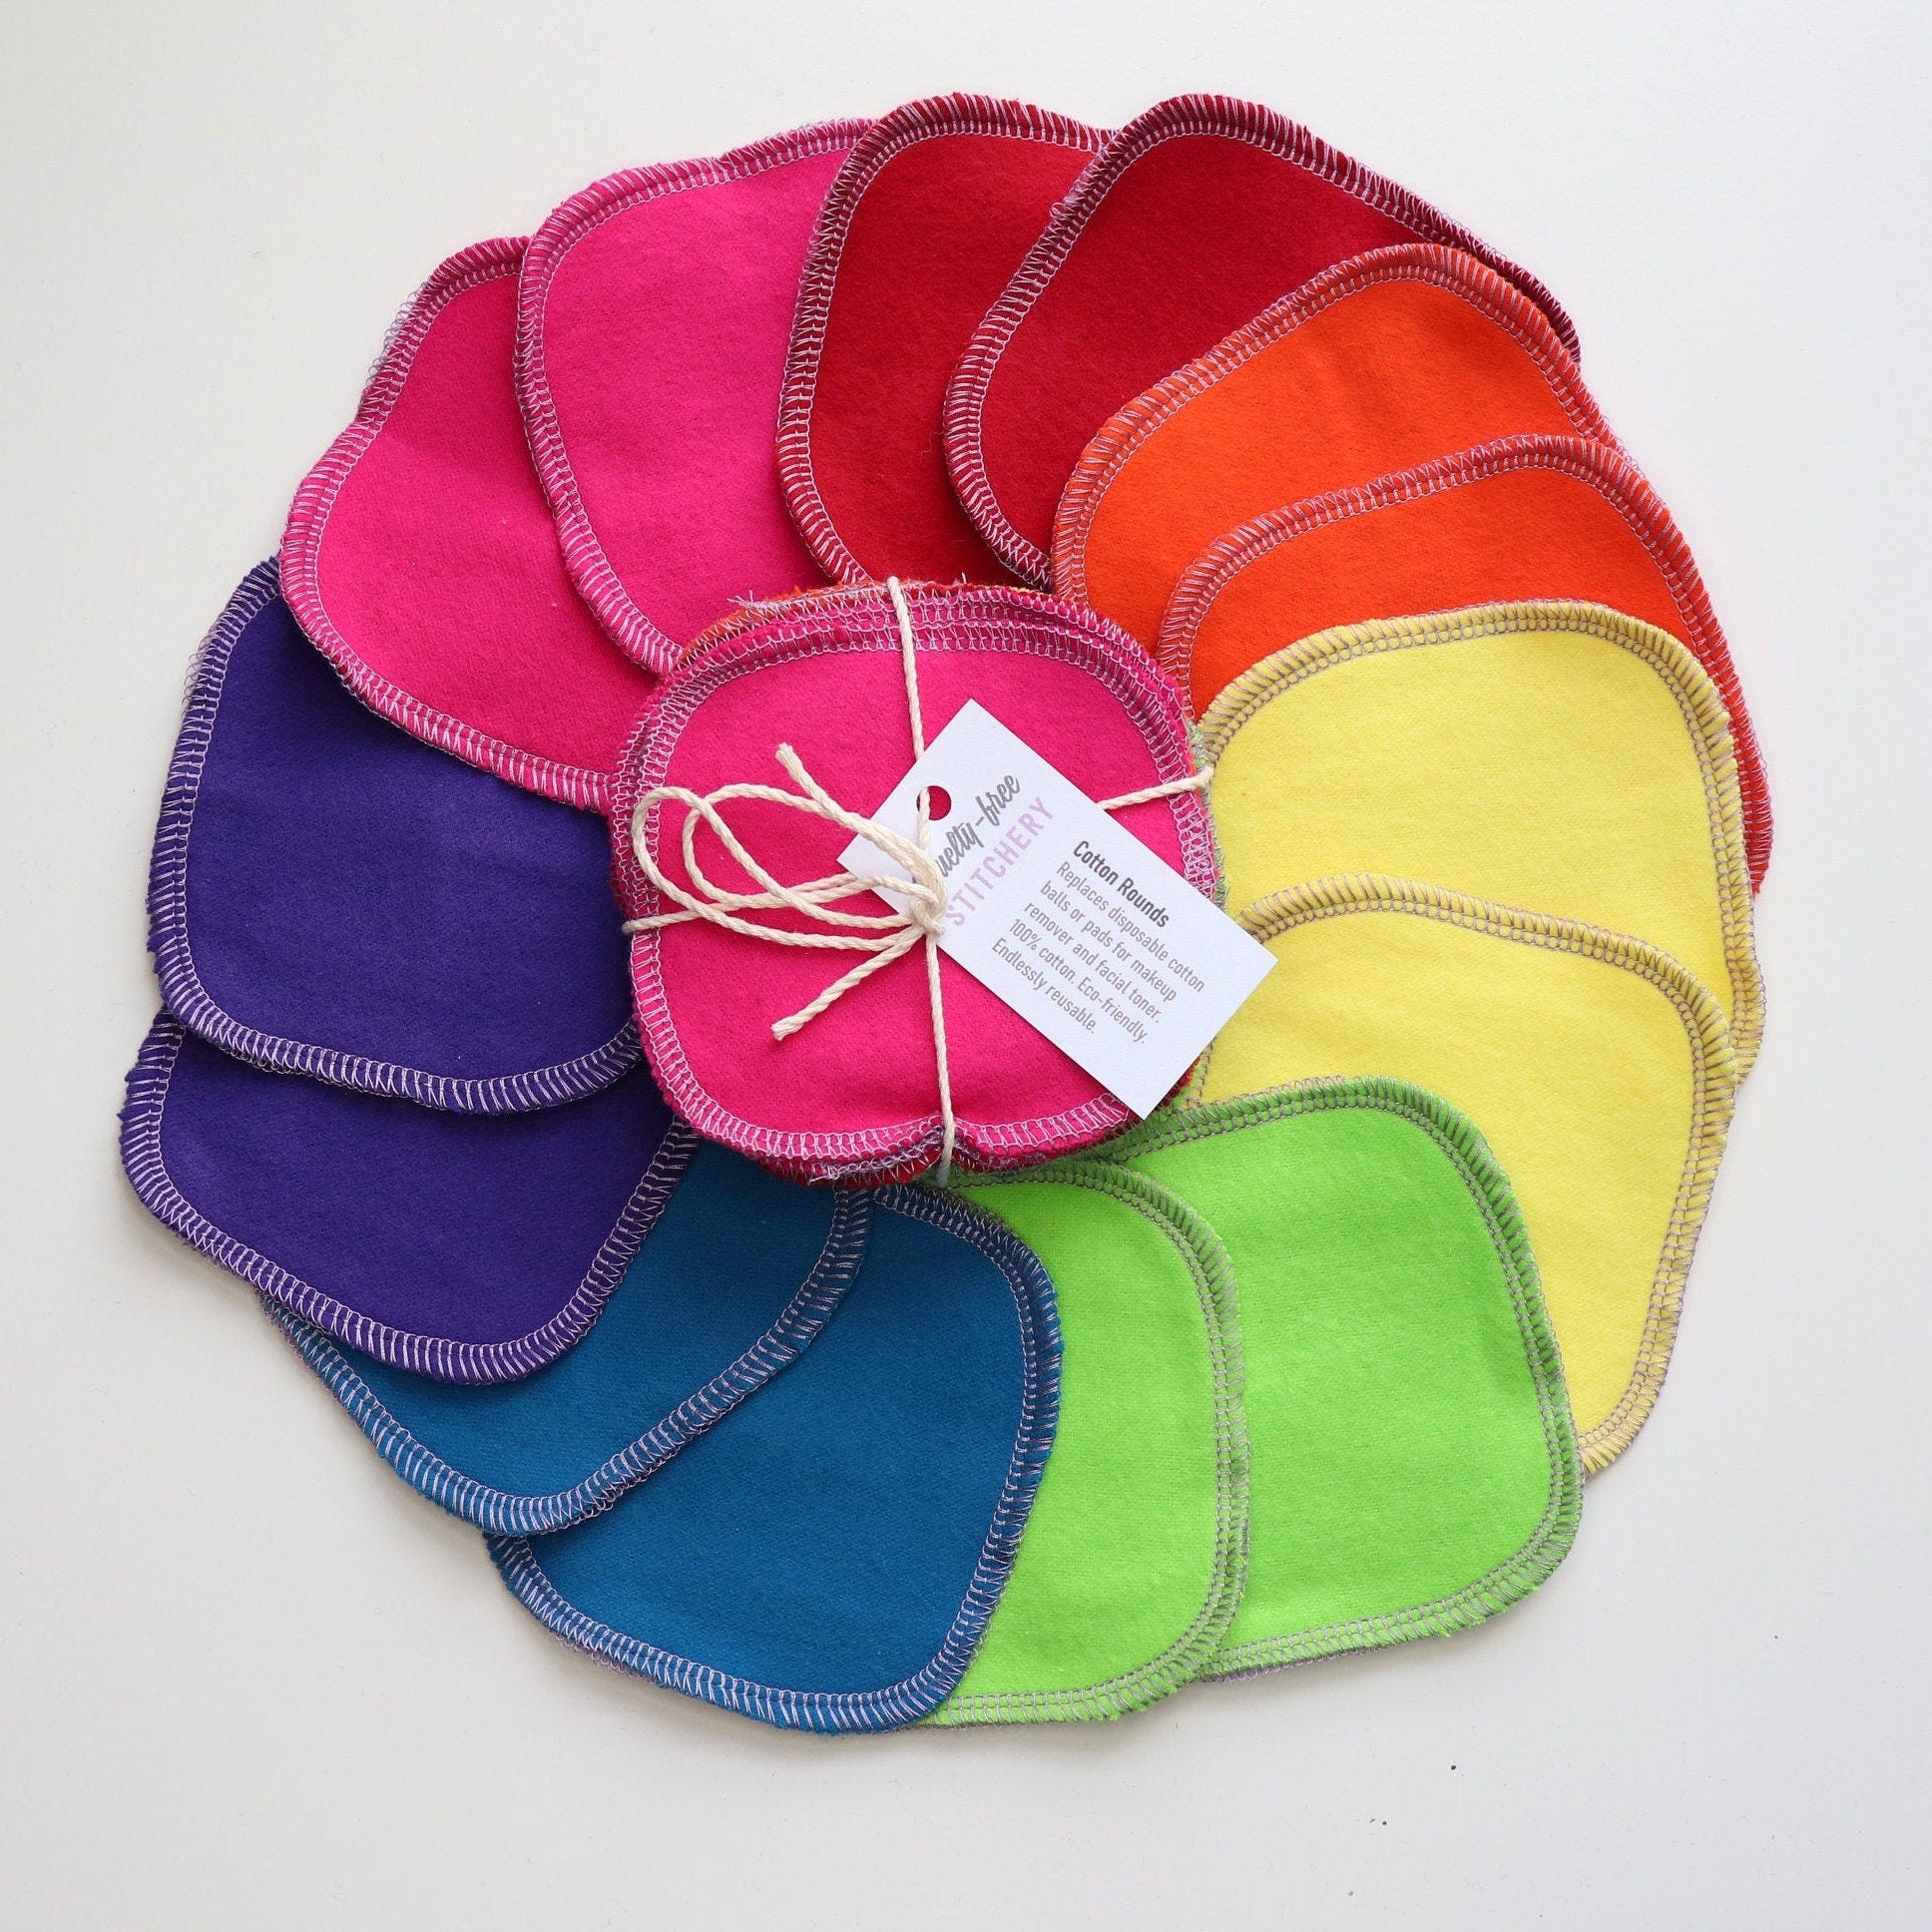 Cotton Rounds arranged in a circle with a bundled pack in the center. Bright rainbow solid colors, 2 each of hot pink, red, orange, yellow, lime green, blue, and purple.